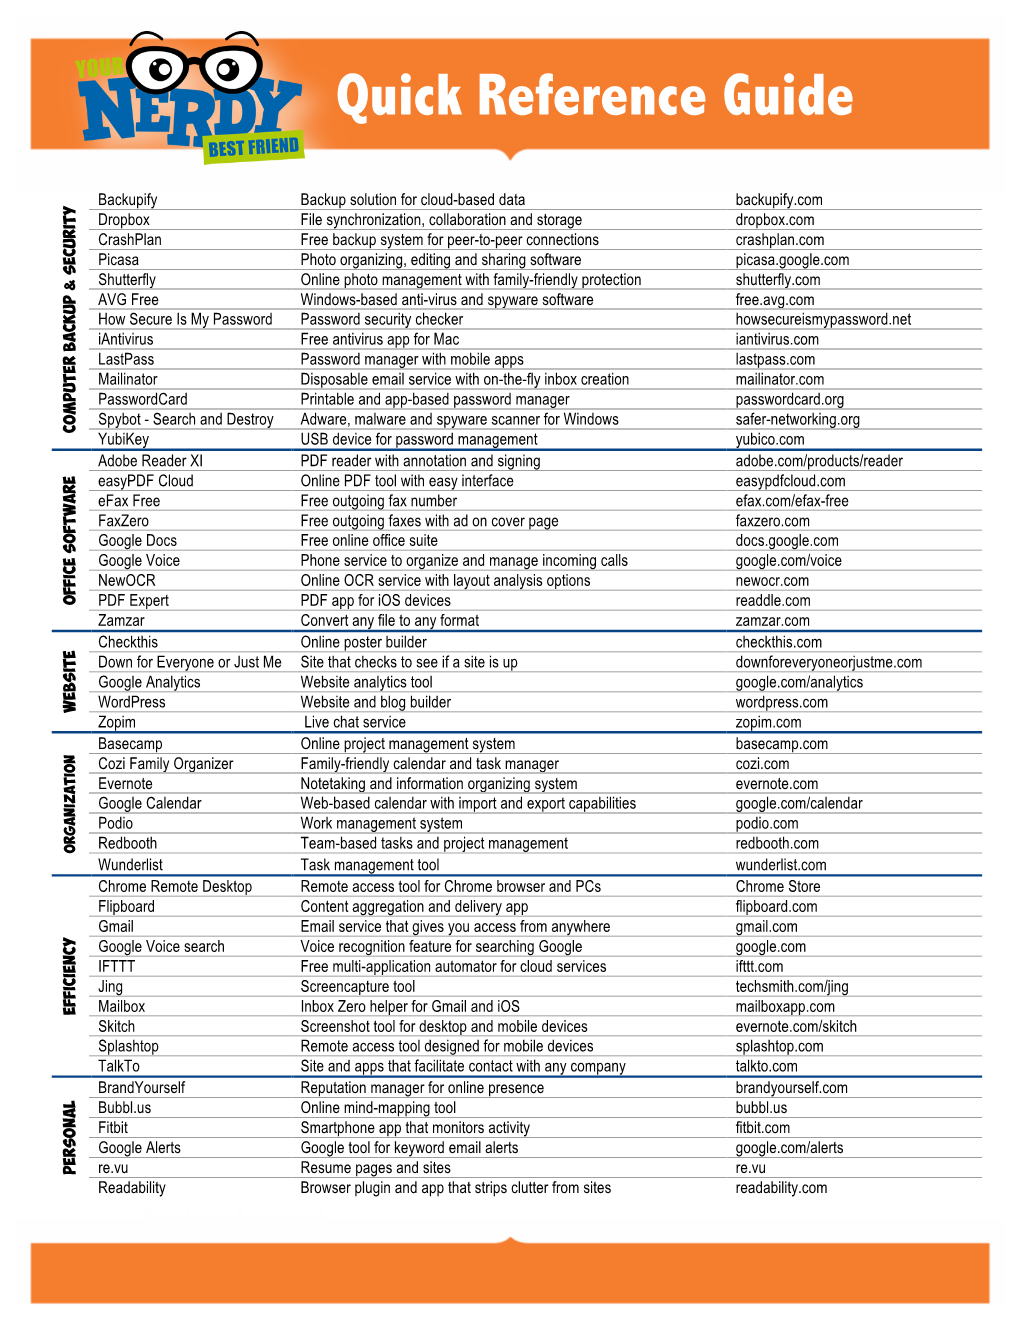 Quick Reference Guide Spring 2014